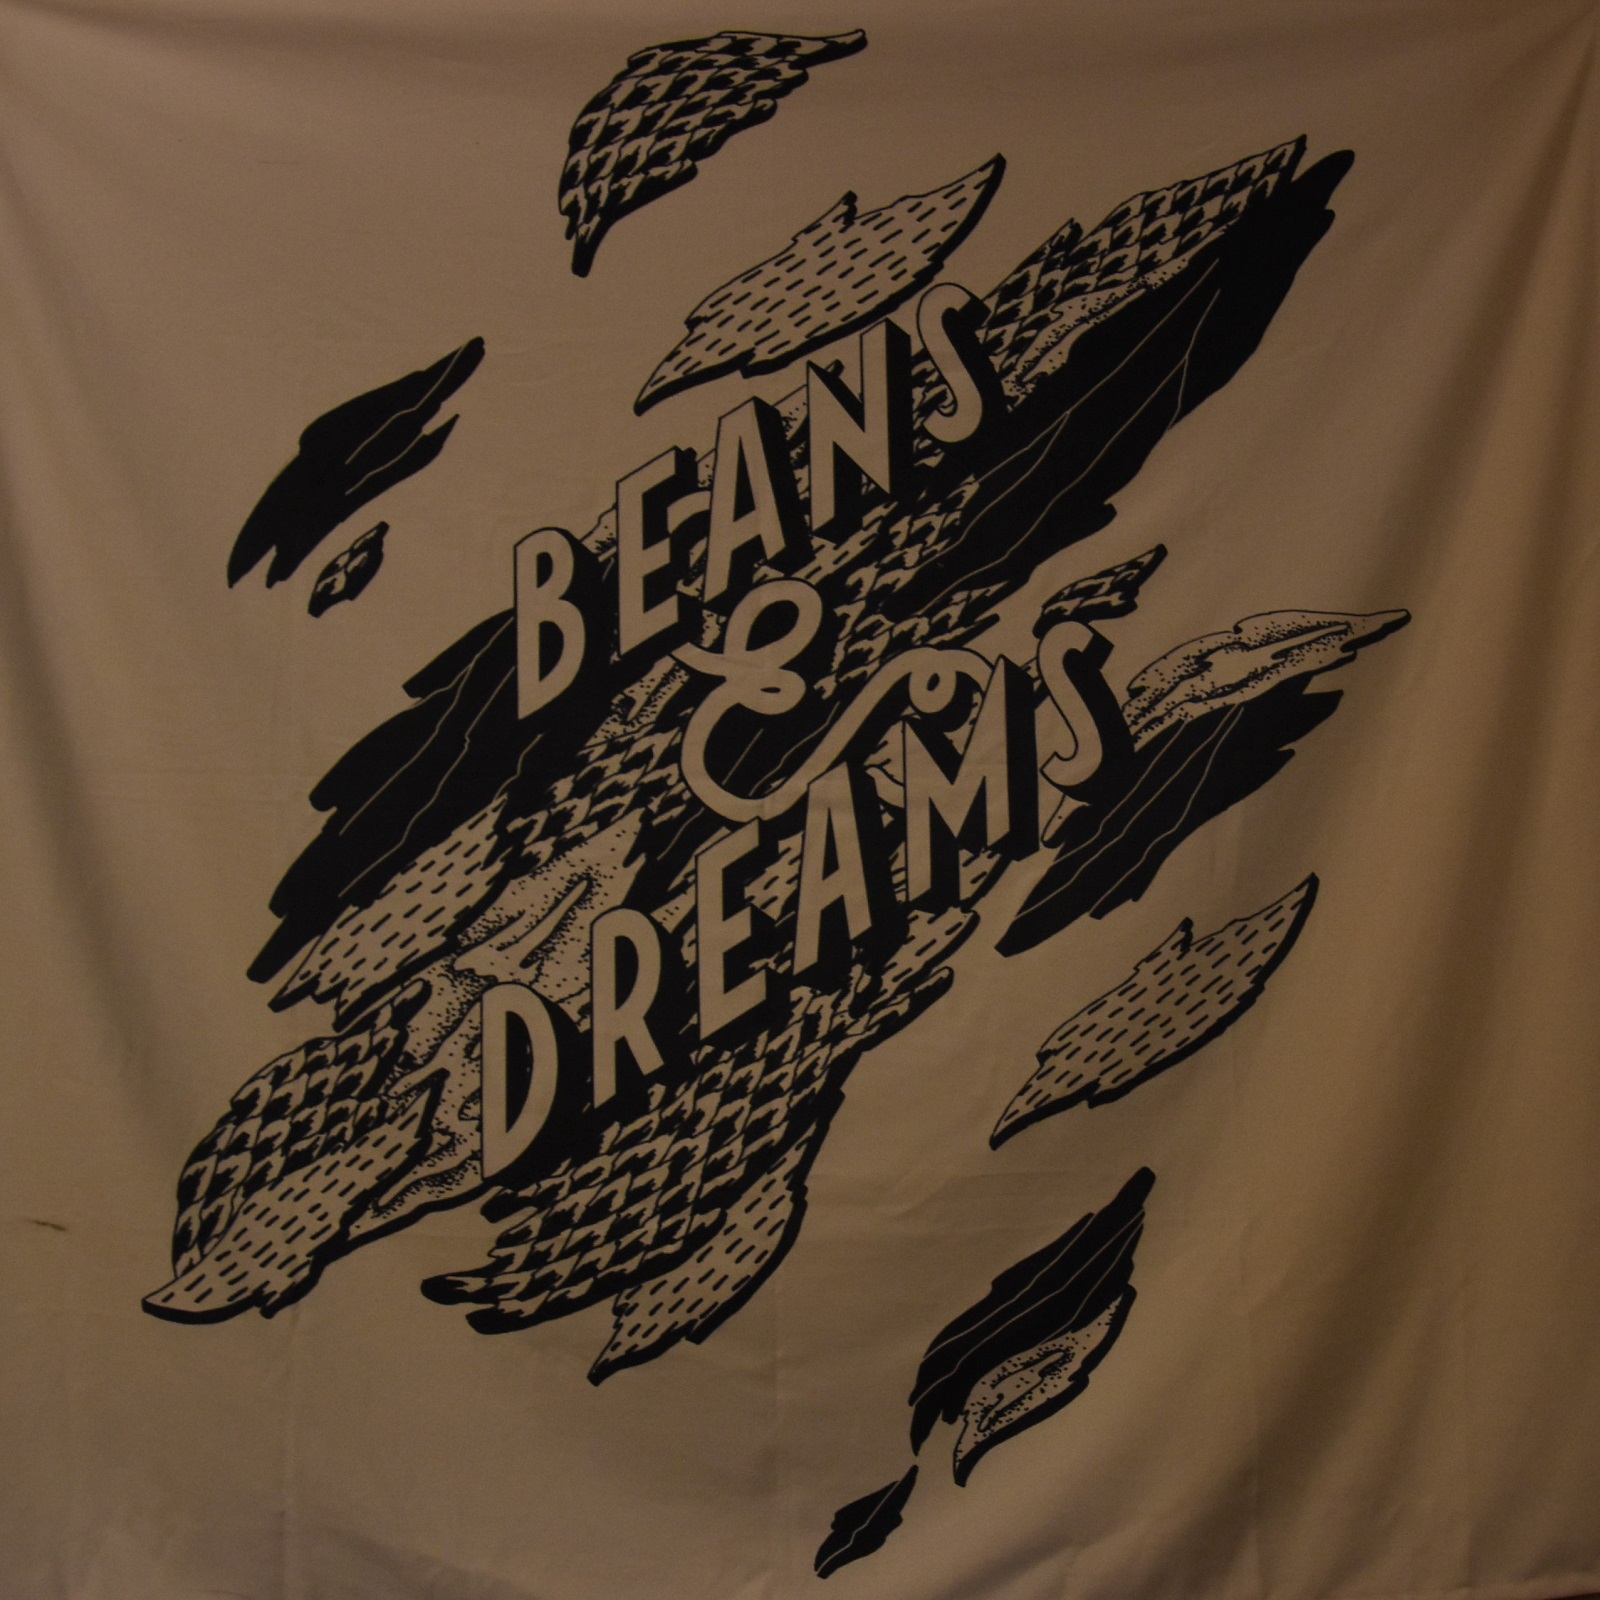 Beans & Dreams decoration, taken from the wall in the Single O roastery in Tokyo.